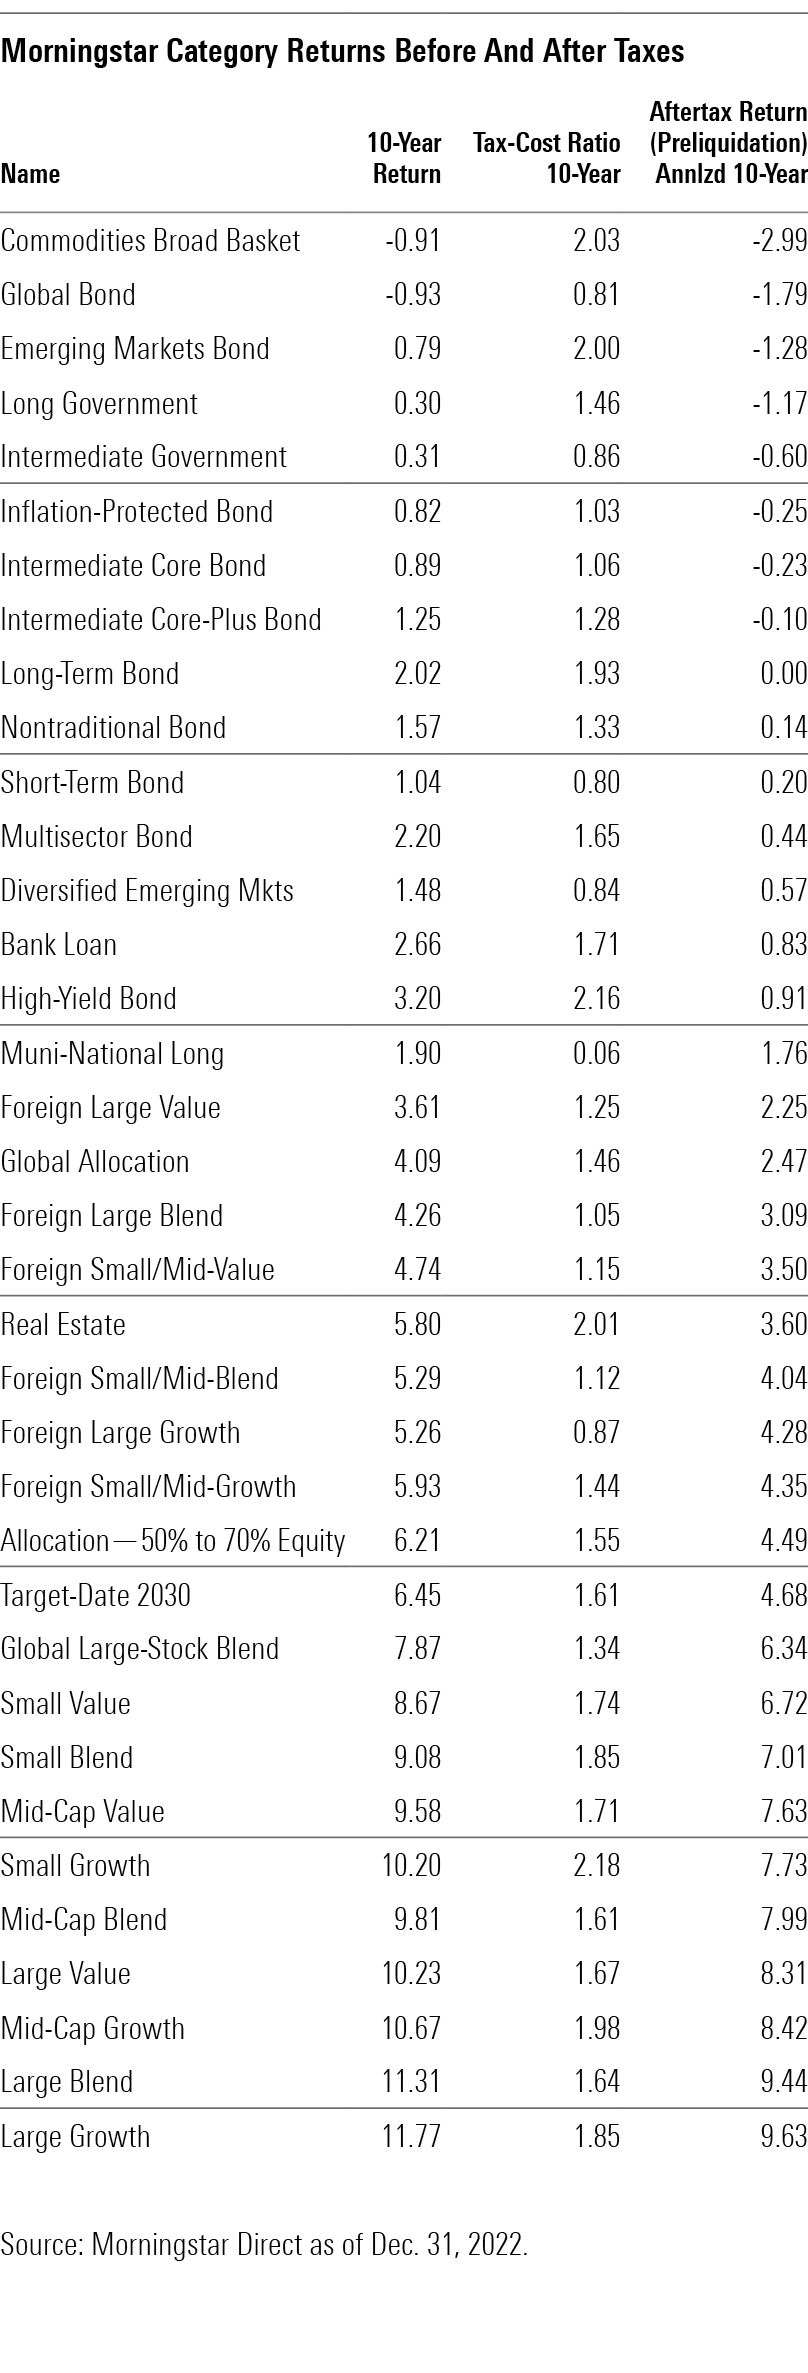 A table showing the 10-year tax-cost ratios and aftertax 10-year returns of various Morningstar Categories.